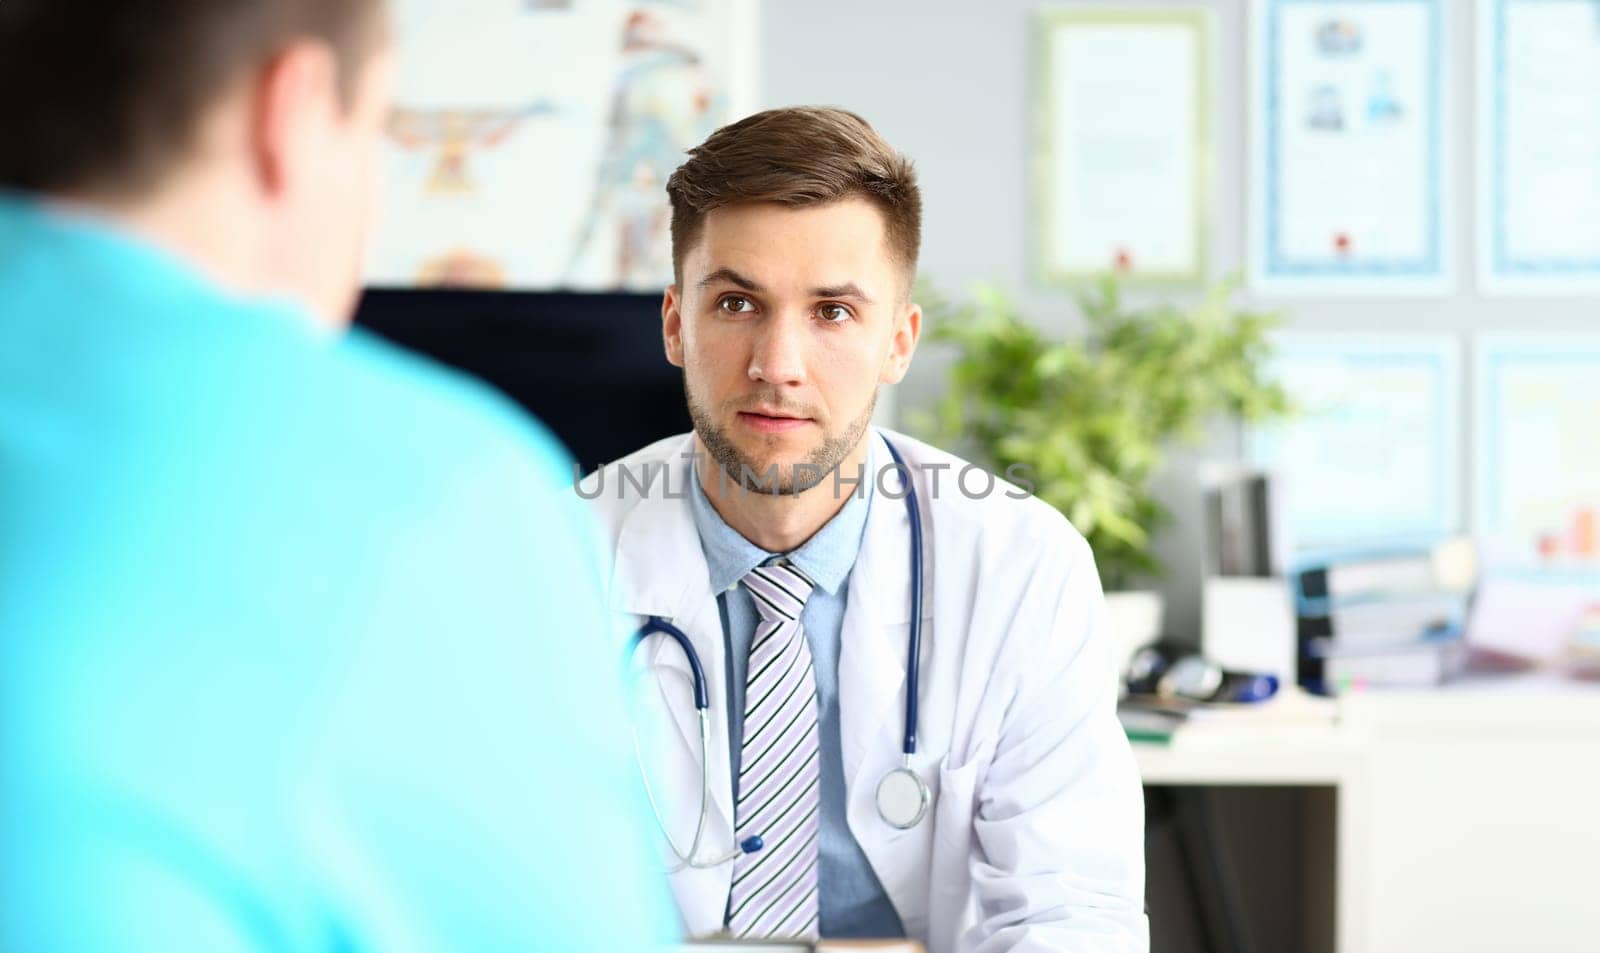 Portrait of worried physician talking and looking at colleague with fear and disturbance. Concerned man wearing stethoscope and white robe with striped tie. Medical treatment concept